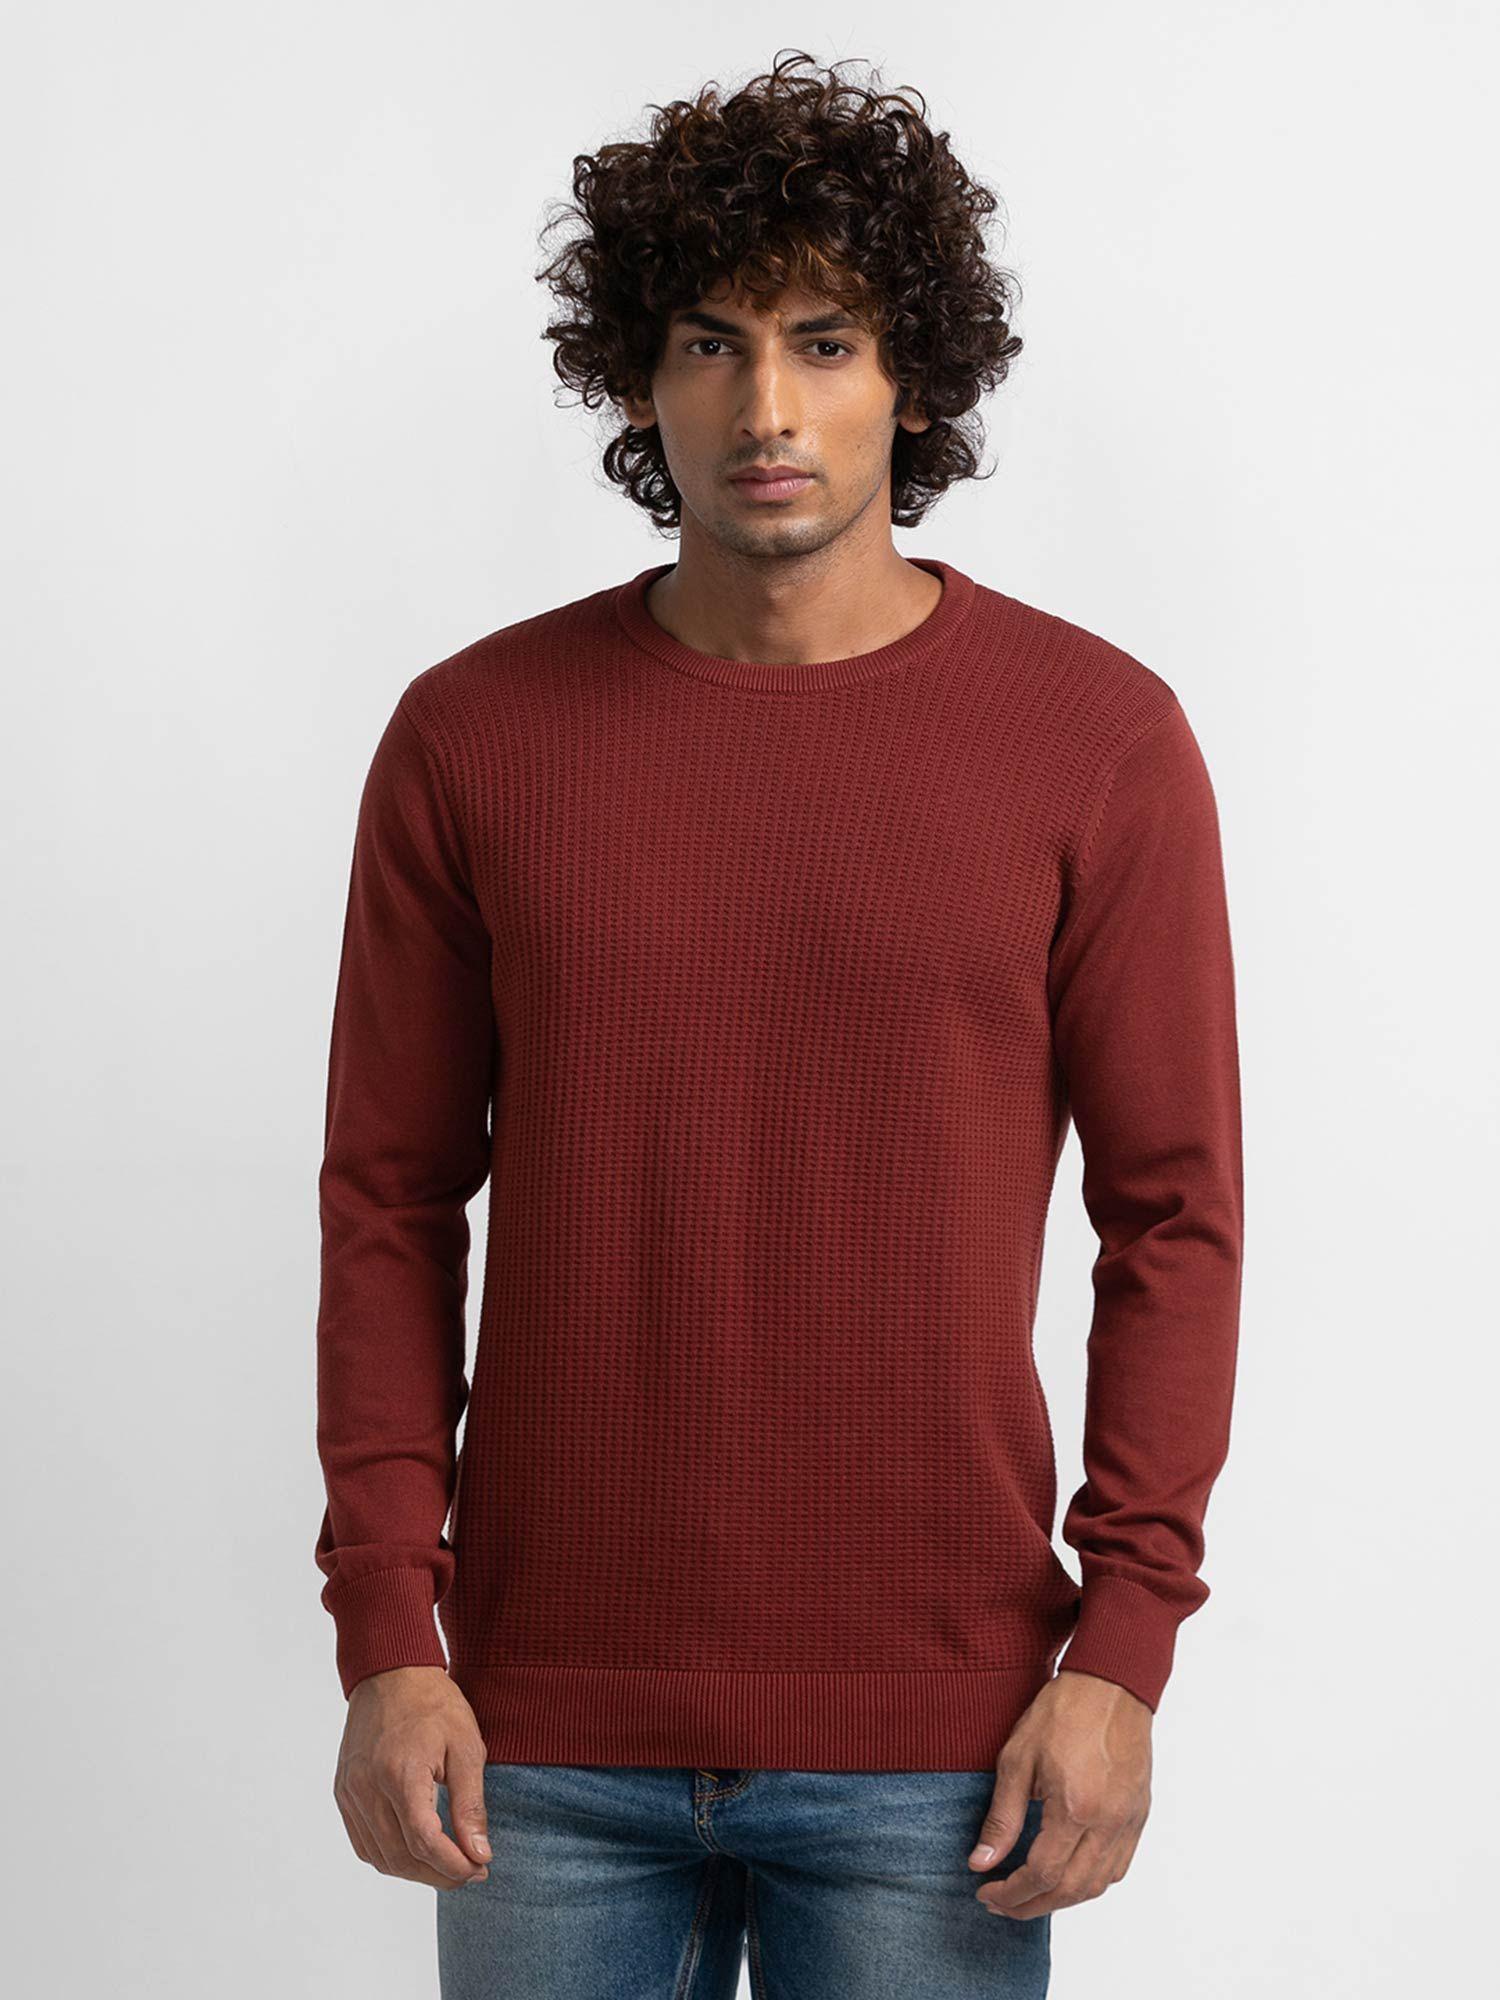 brick-red-cotton-full-sleeve-casual-sweater-for-men